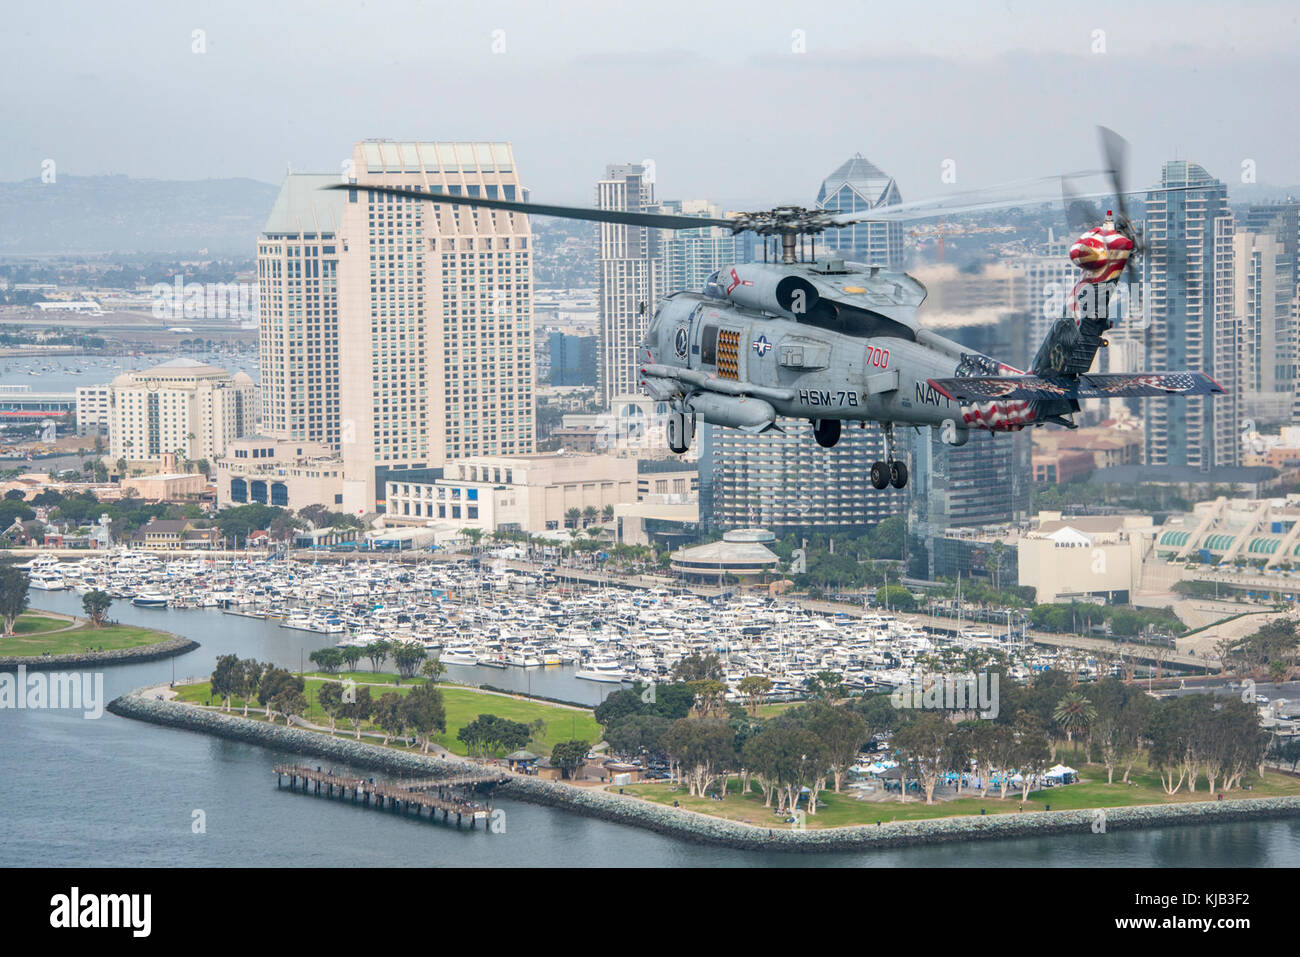 171112-N-BL637-0128  SAN DIEGO (Nov. 12, 2017) An MH-60R Sea Hawk helicopter assigned to the “Blue Hawks” of Helicopter Maritime Strike Squadron (HSM) 78 conducts training near the Nimitz-class aircraft carrier USS Carl Vinson (CVN 70). Members of Carrier Strike Group (CSG) 1 are participating in a sustainment training exercise in preparation for an upcoming deployment. (U.S. Navy photo by Mass Communication Specialist 2nd Class Sean M. Castellano/Released) Stock Photo